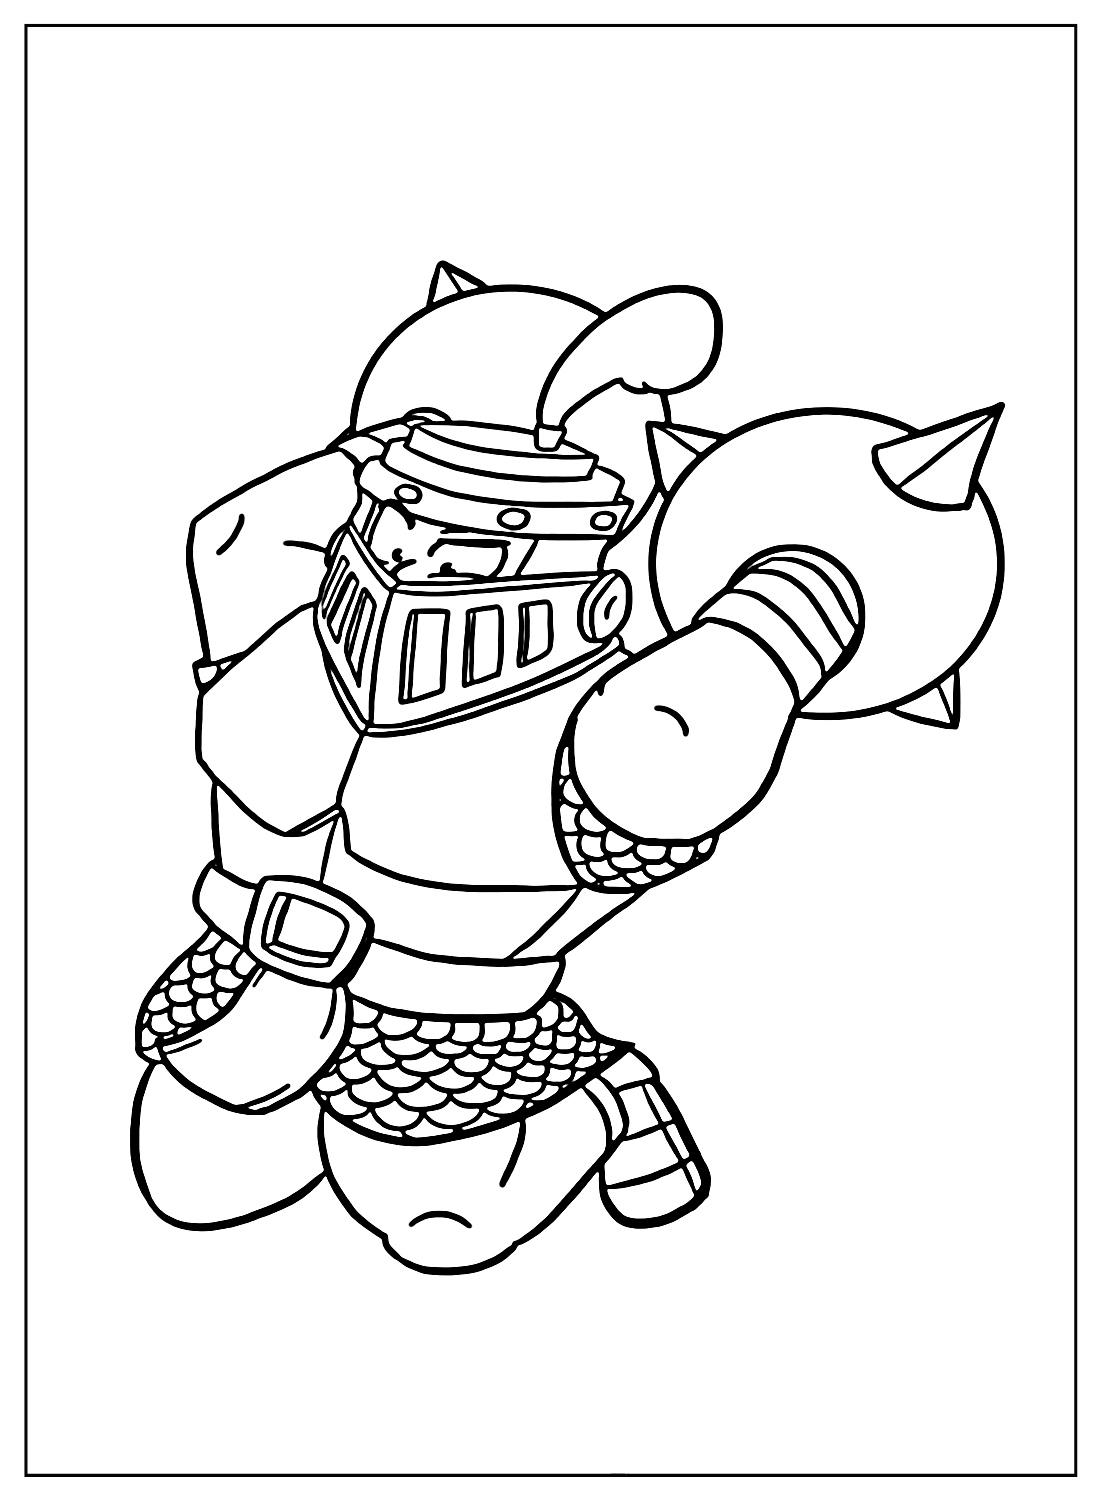 Printable Clash of Clans Coloring Pages from Clash of Clans